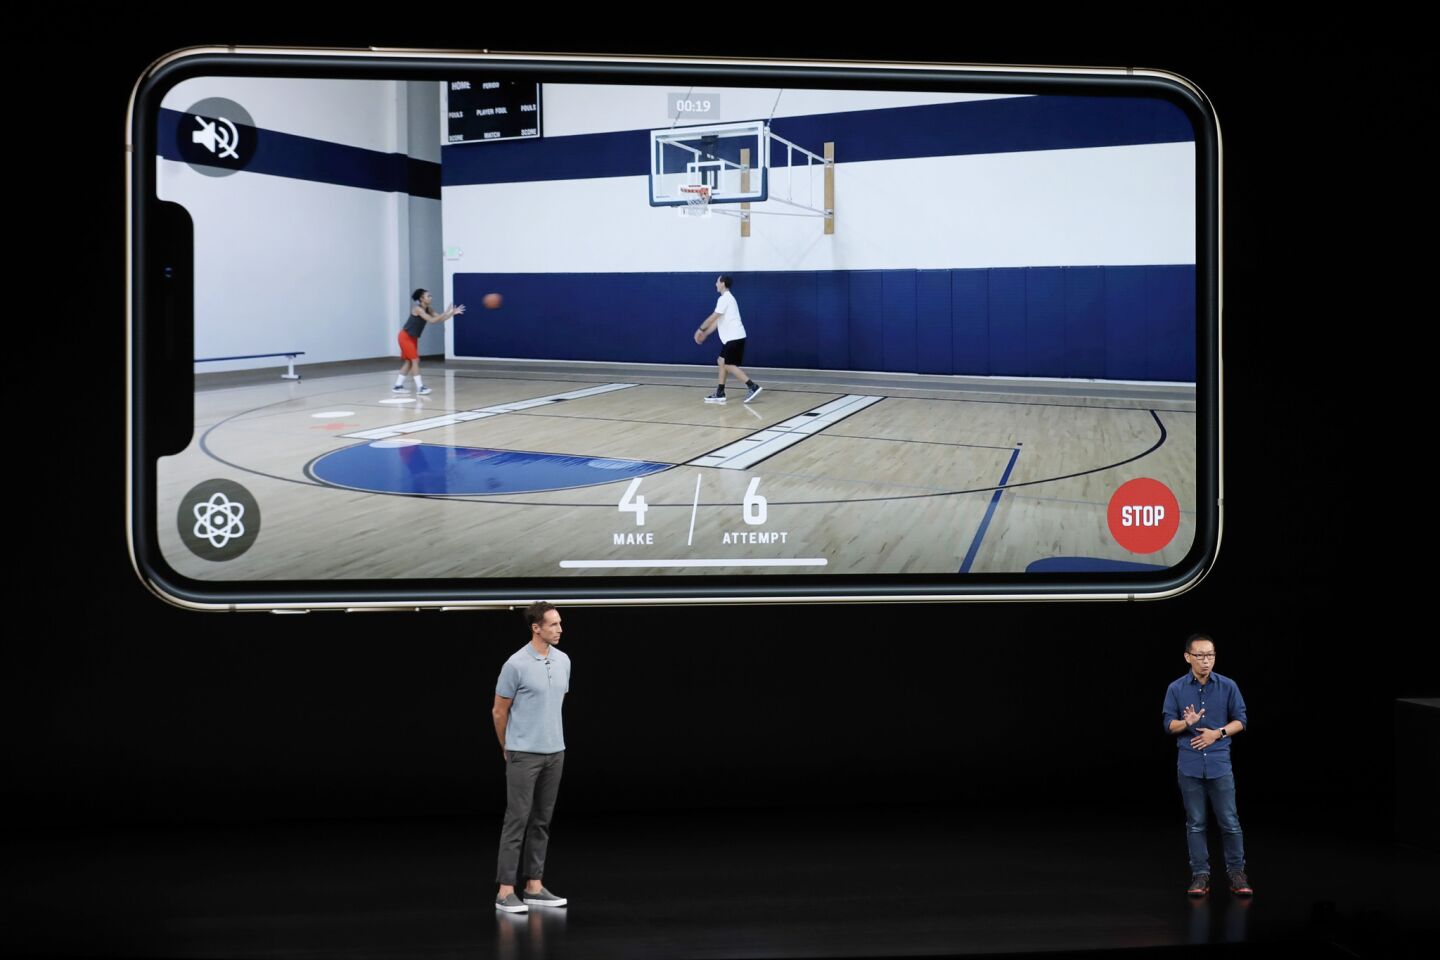 CEO and founder of HomeCourt David Lee, right, and former NBA player Steve Nash talk about the Apple iPhone XS at the Steve Jobs Theater during an event to announce new Apple products Wednesday, Sept. 12, 2018, in Cupertino, Calif. (AP Photo/Marcio Jose Sanchez)